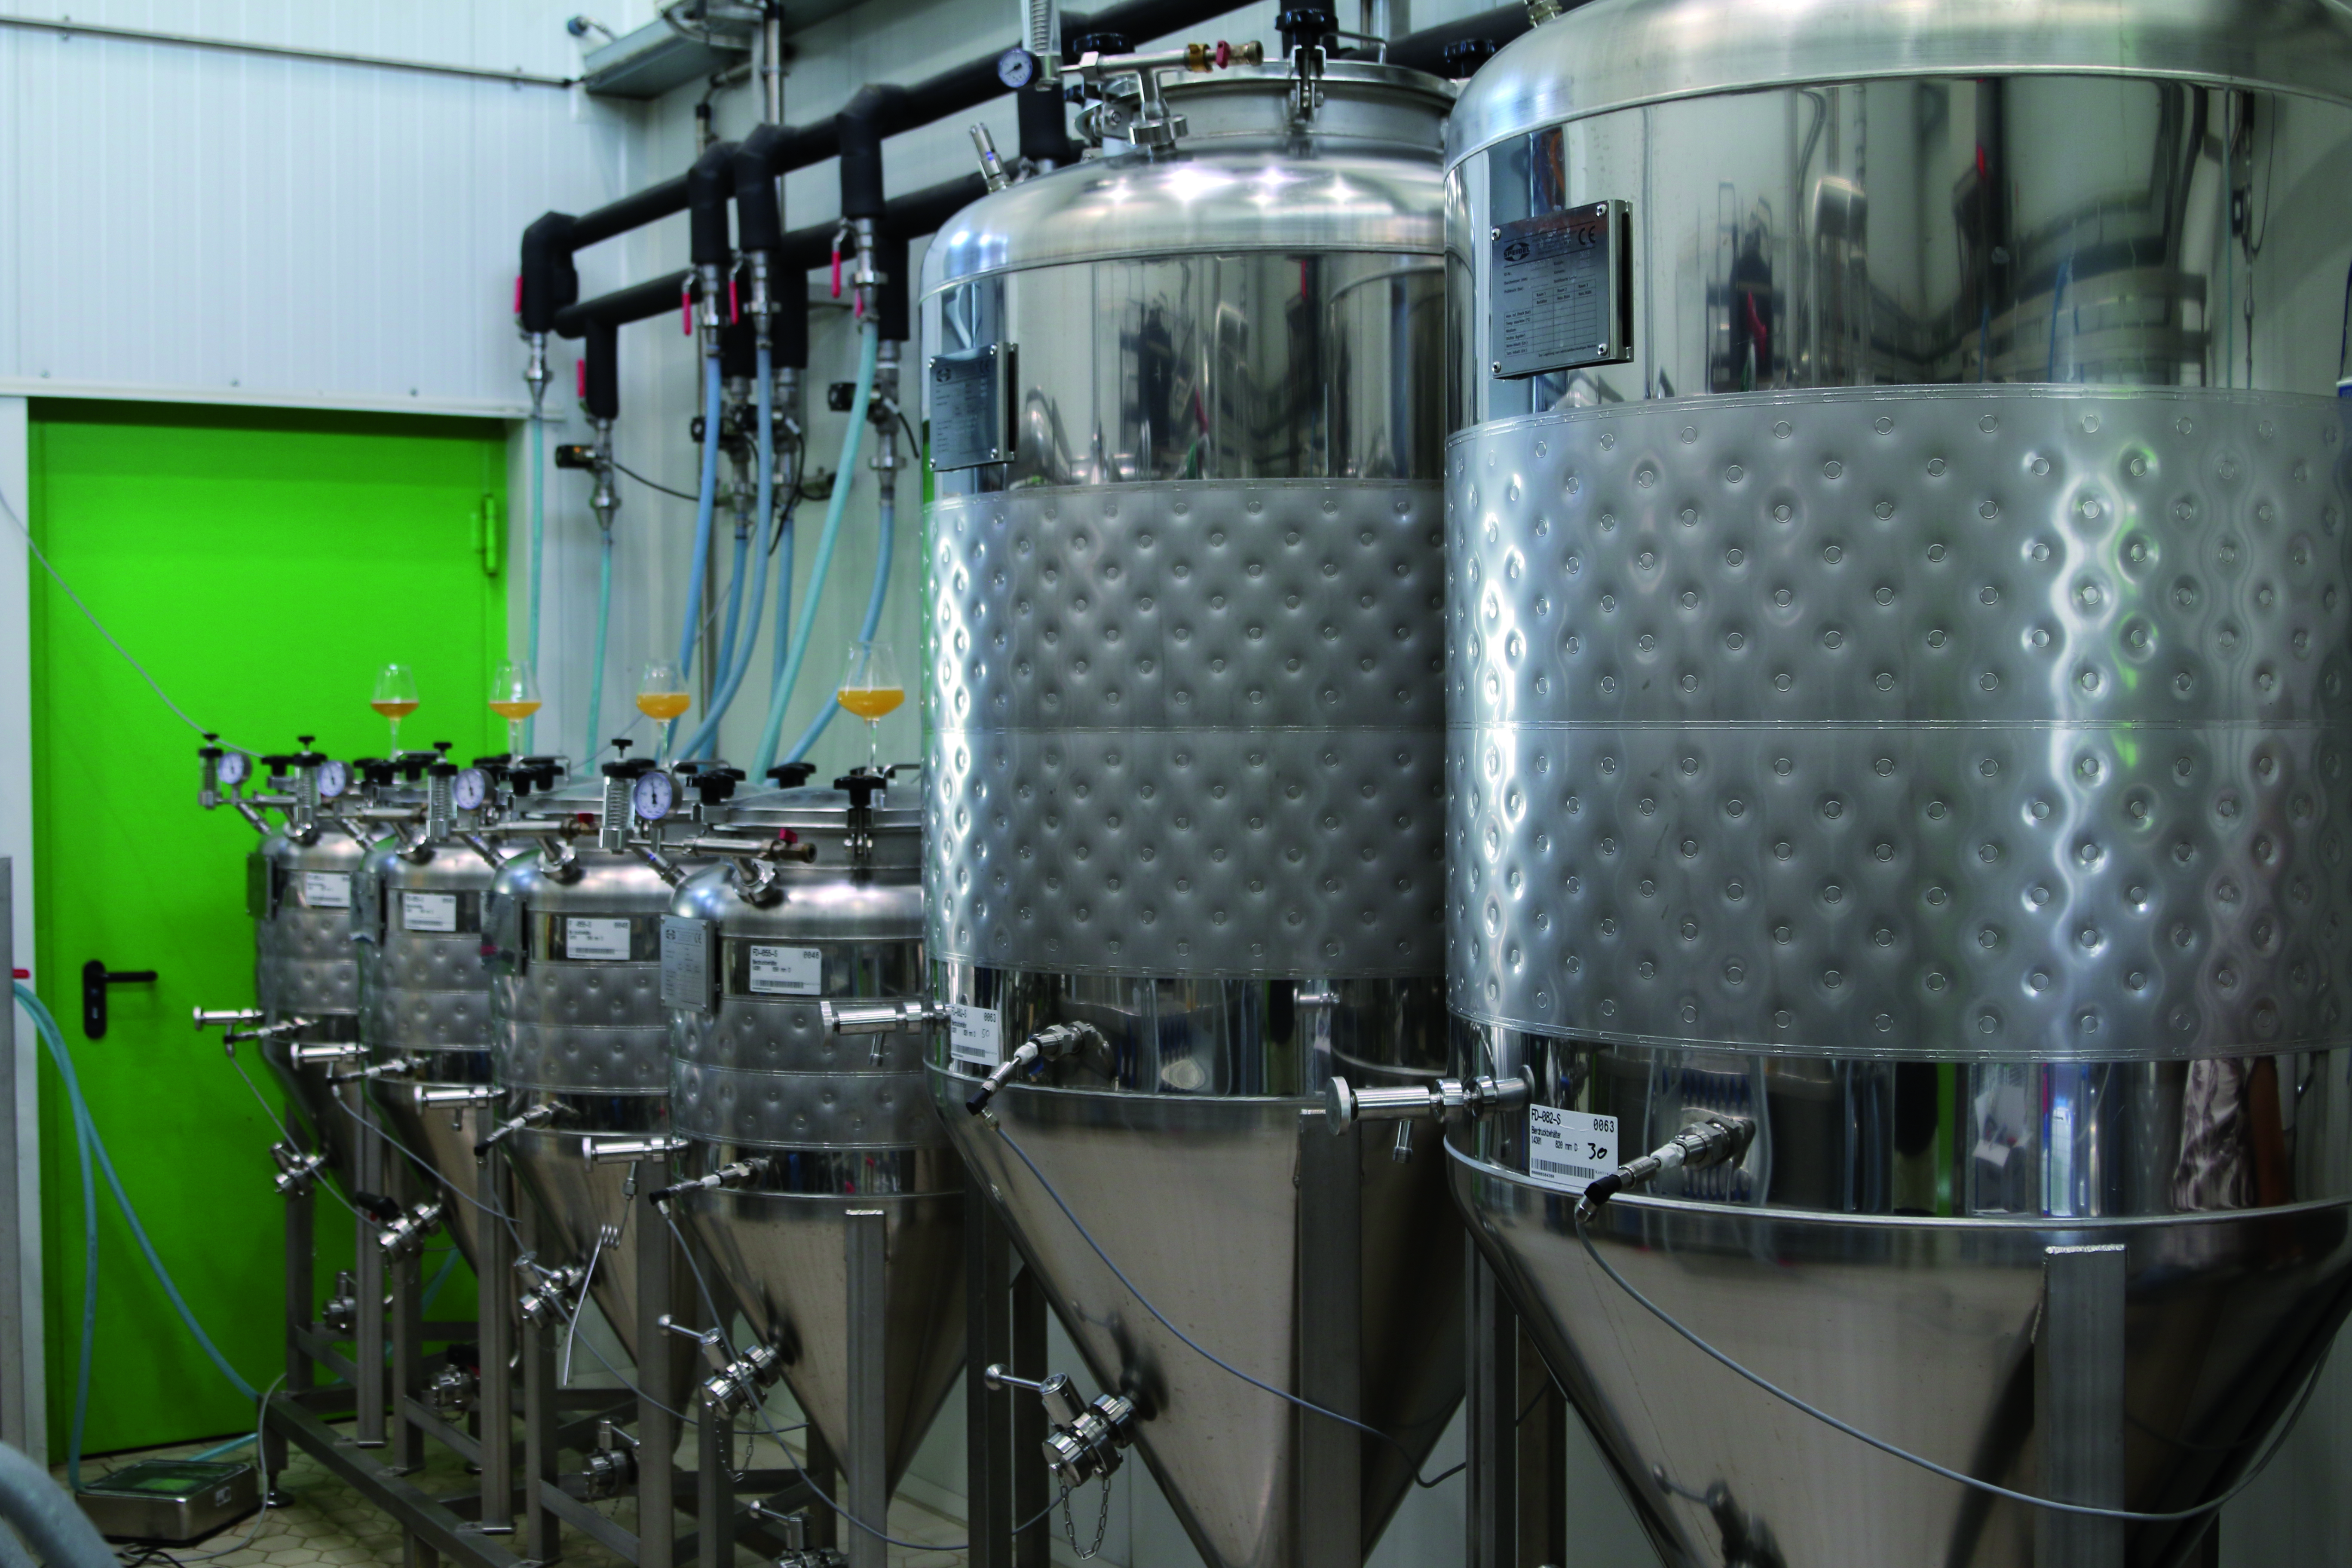 A view into the Hopsteiner test brewery